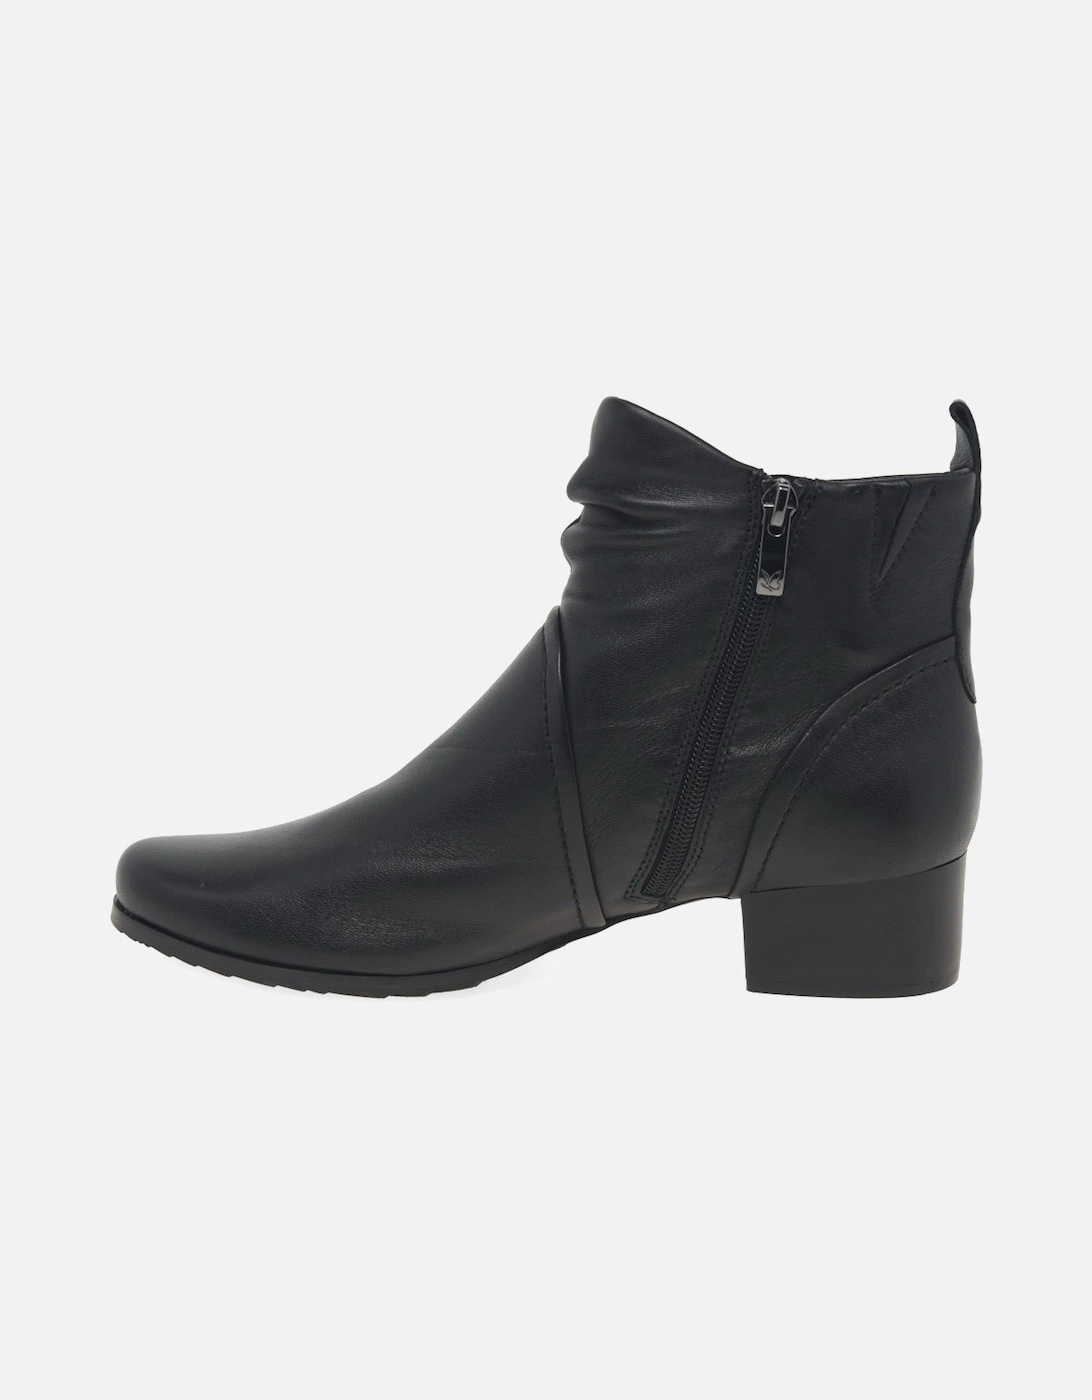 Fearne Womens Ankle Boots